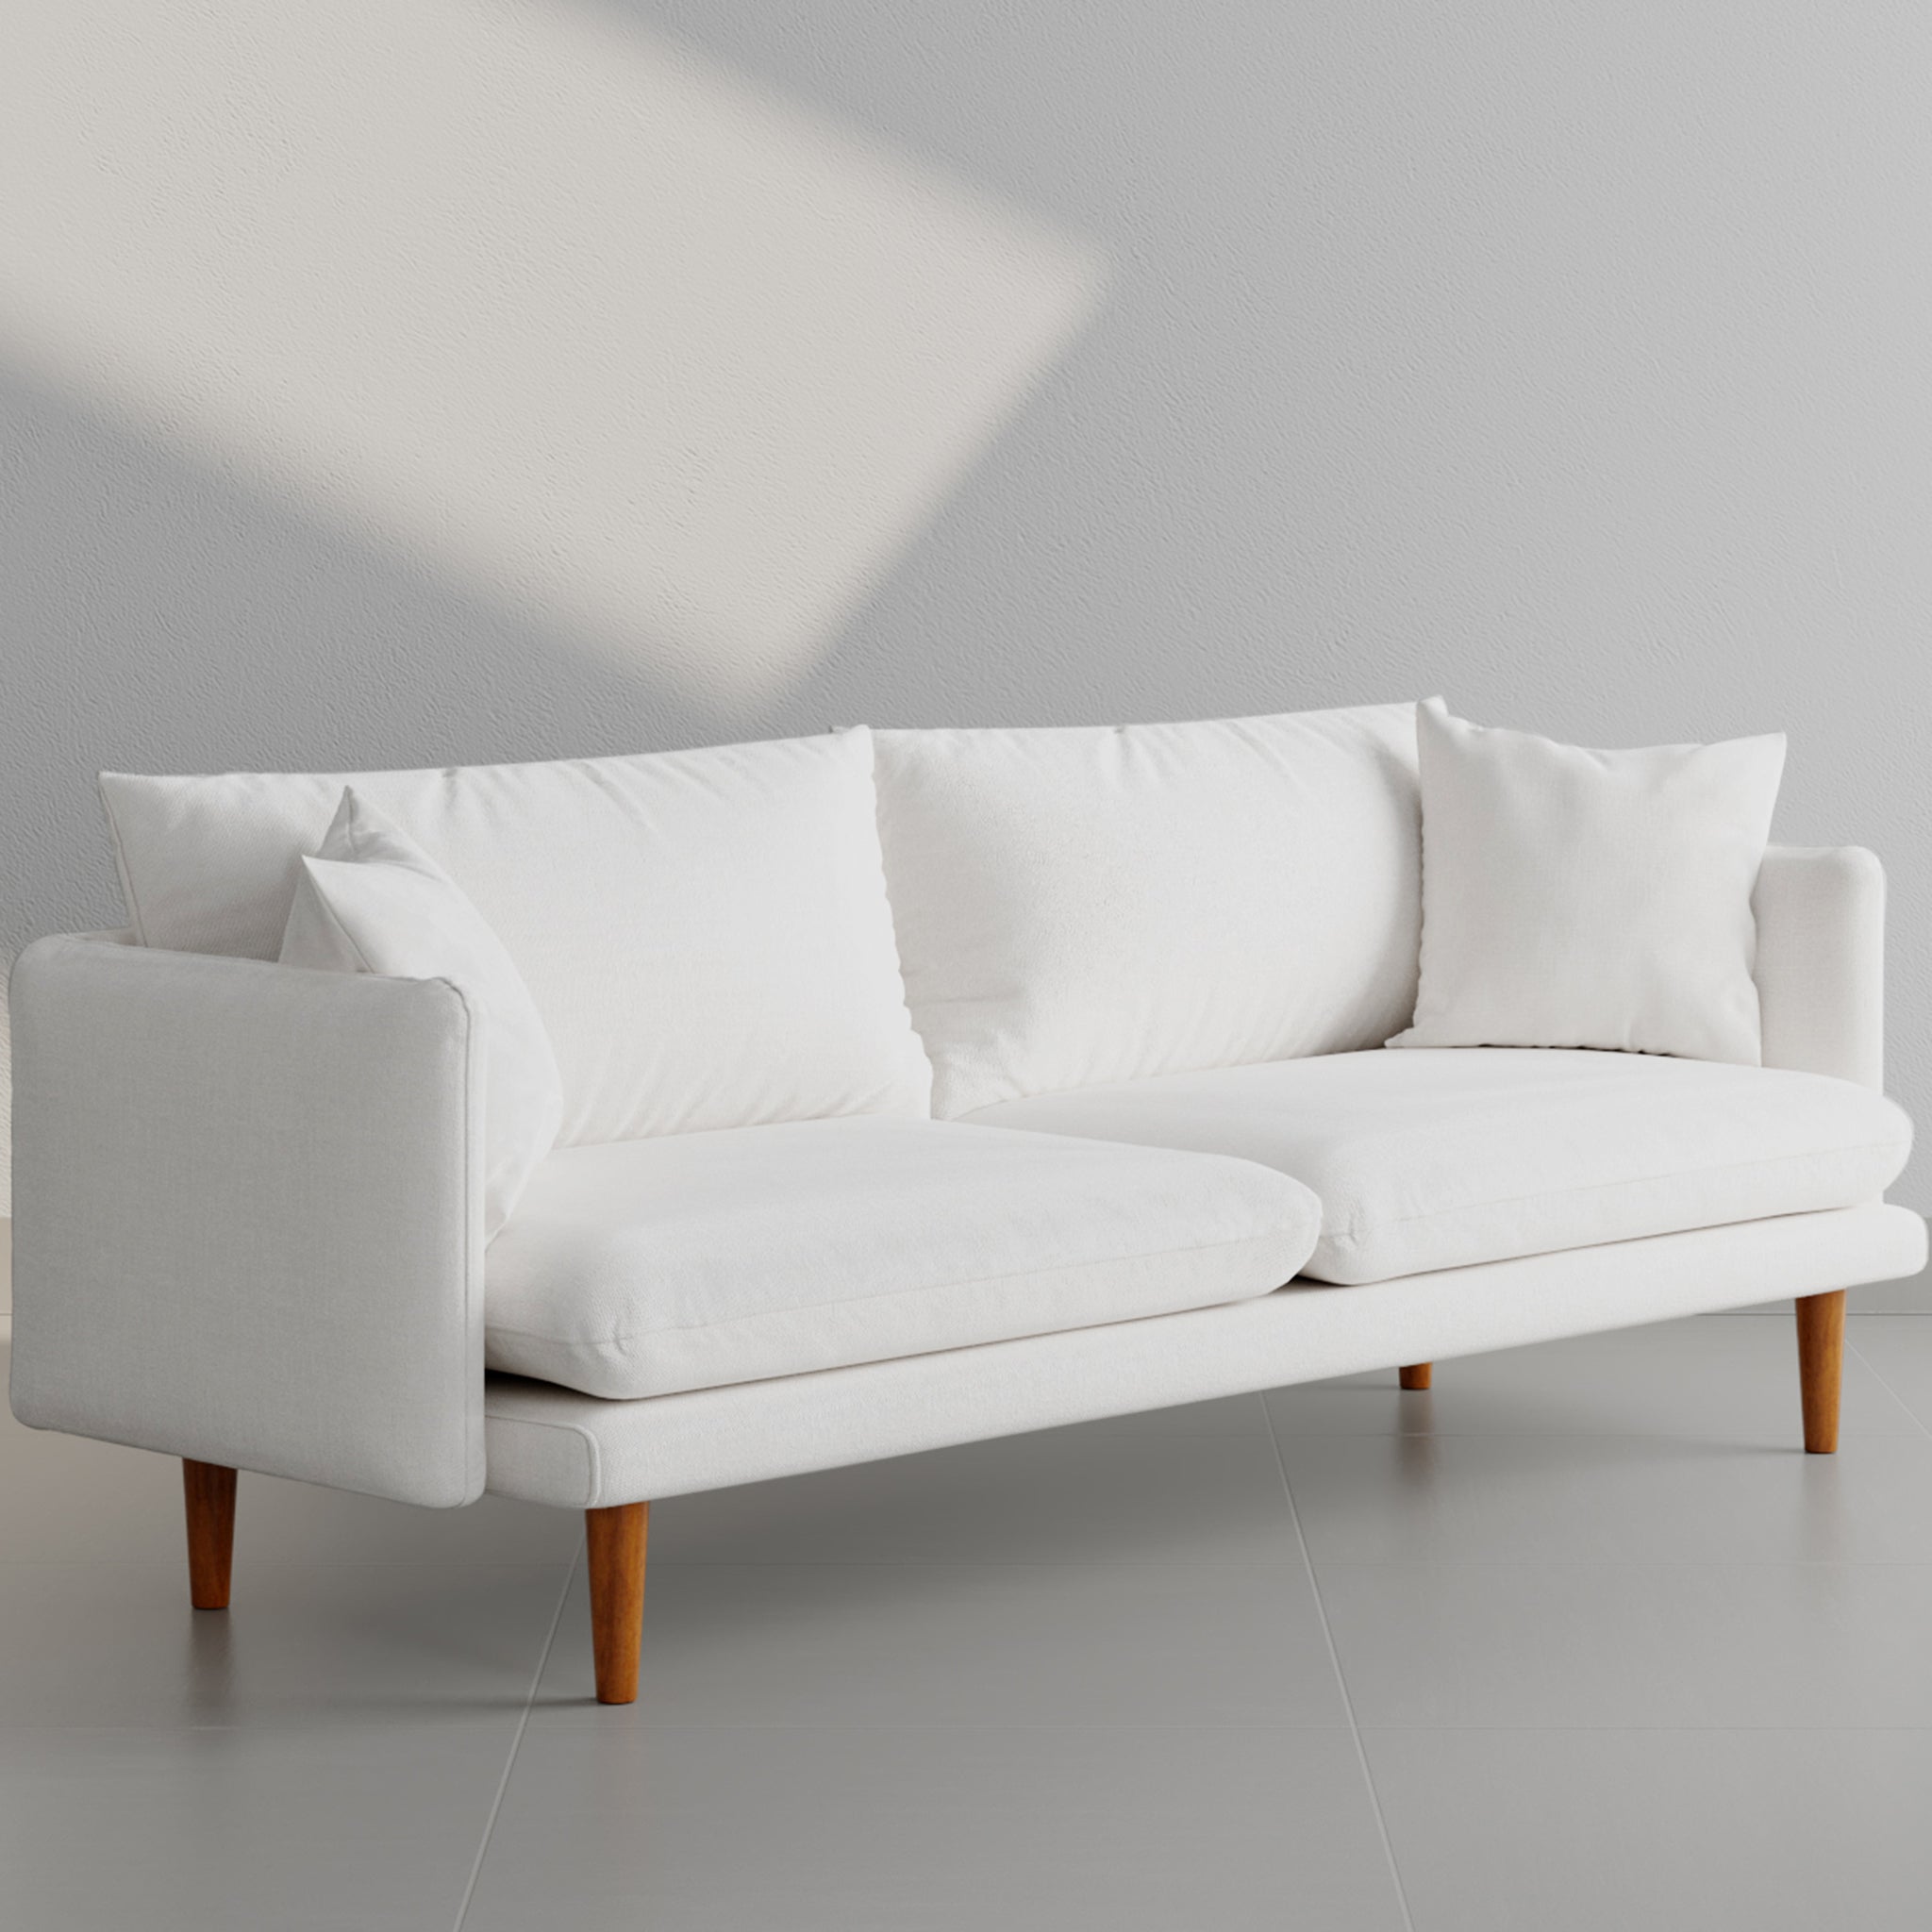 Angled view of a stylish white sofa with plush cushions and wooden legs, perfect for a contemporary living space.